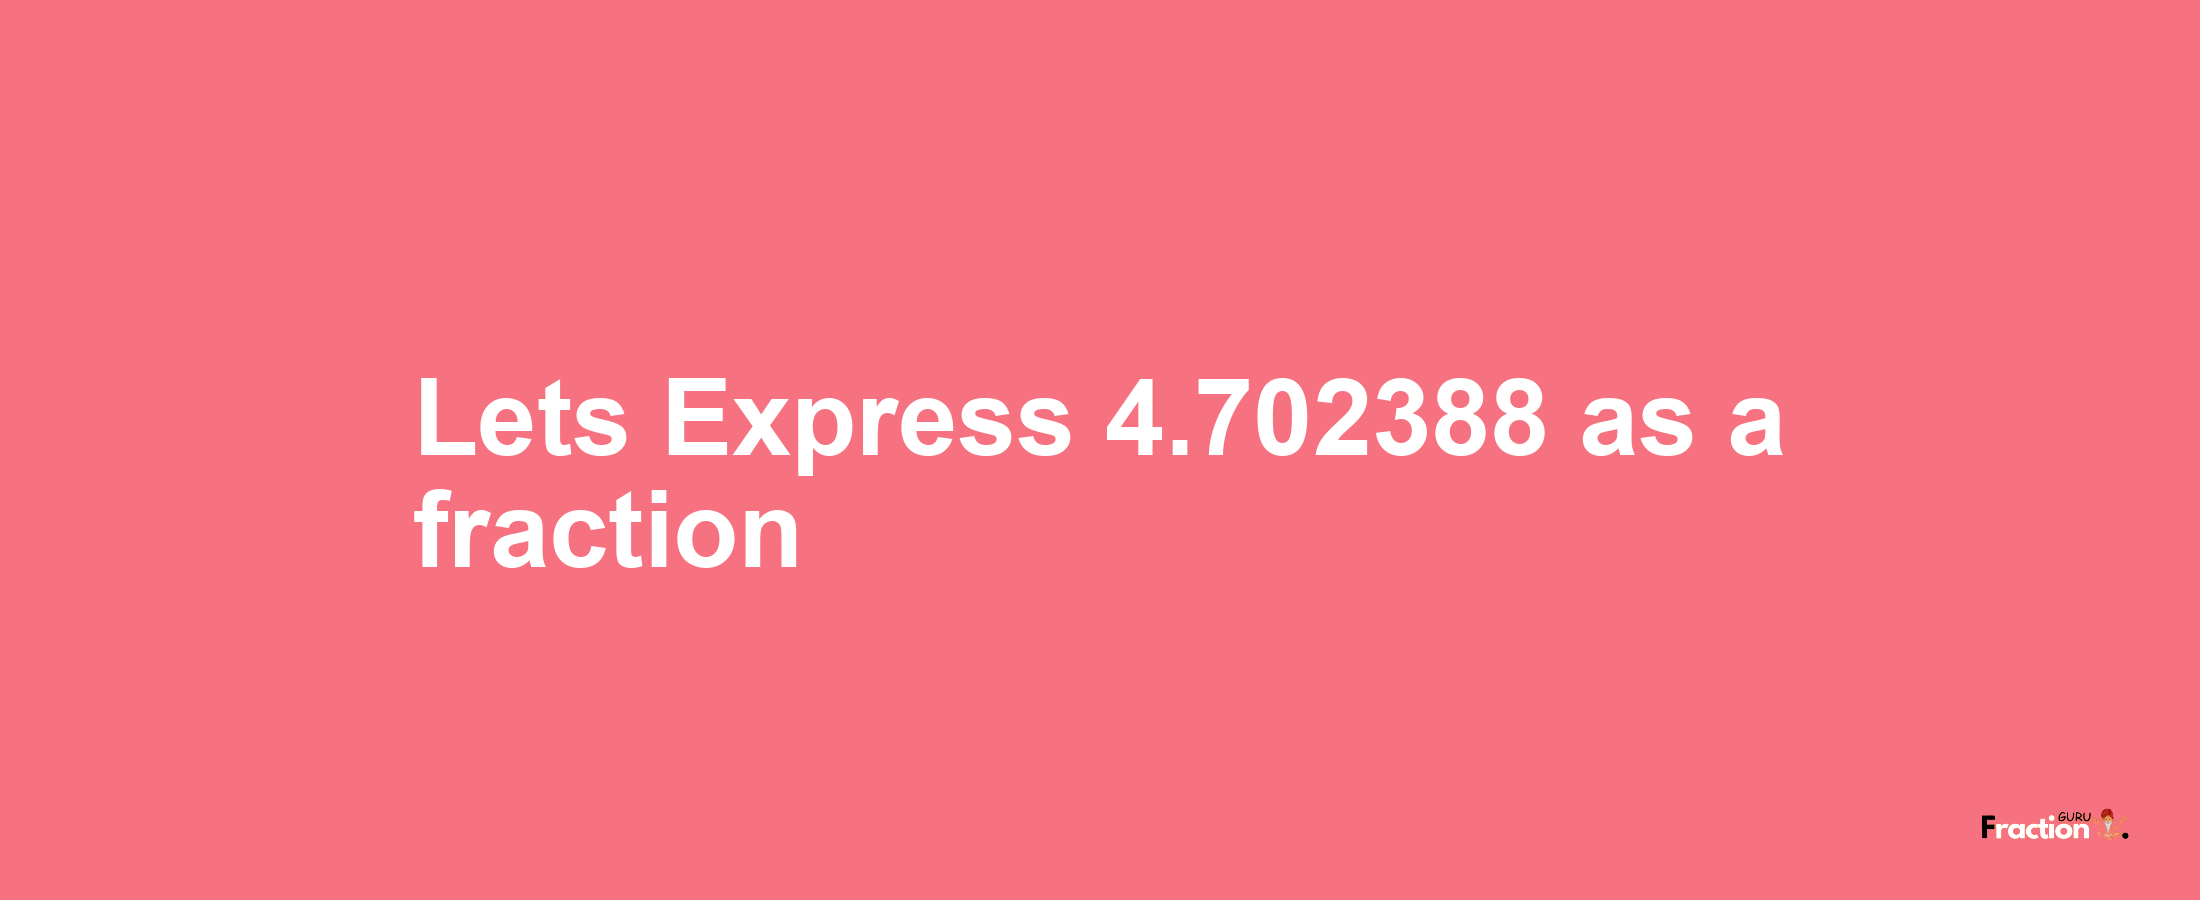 Lets Express 4.702388 as afraction